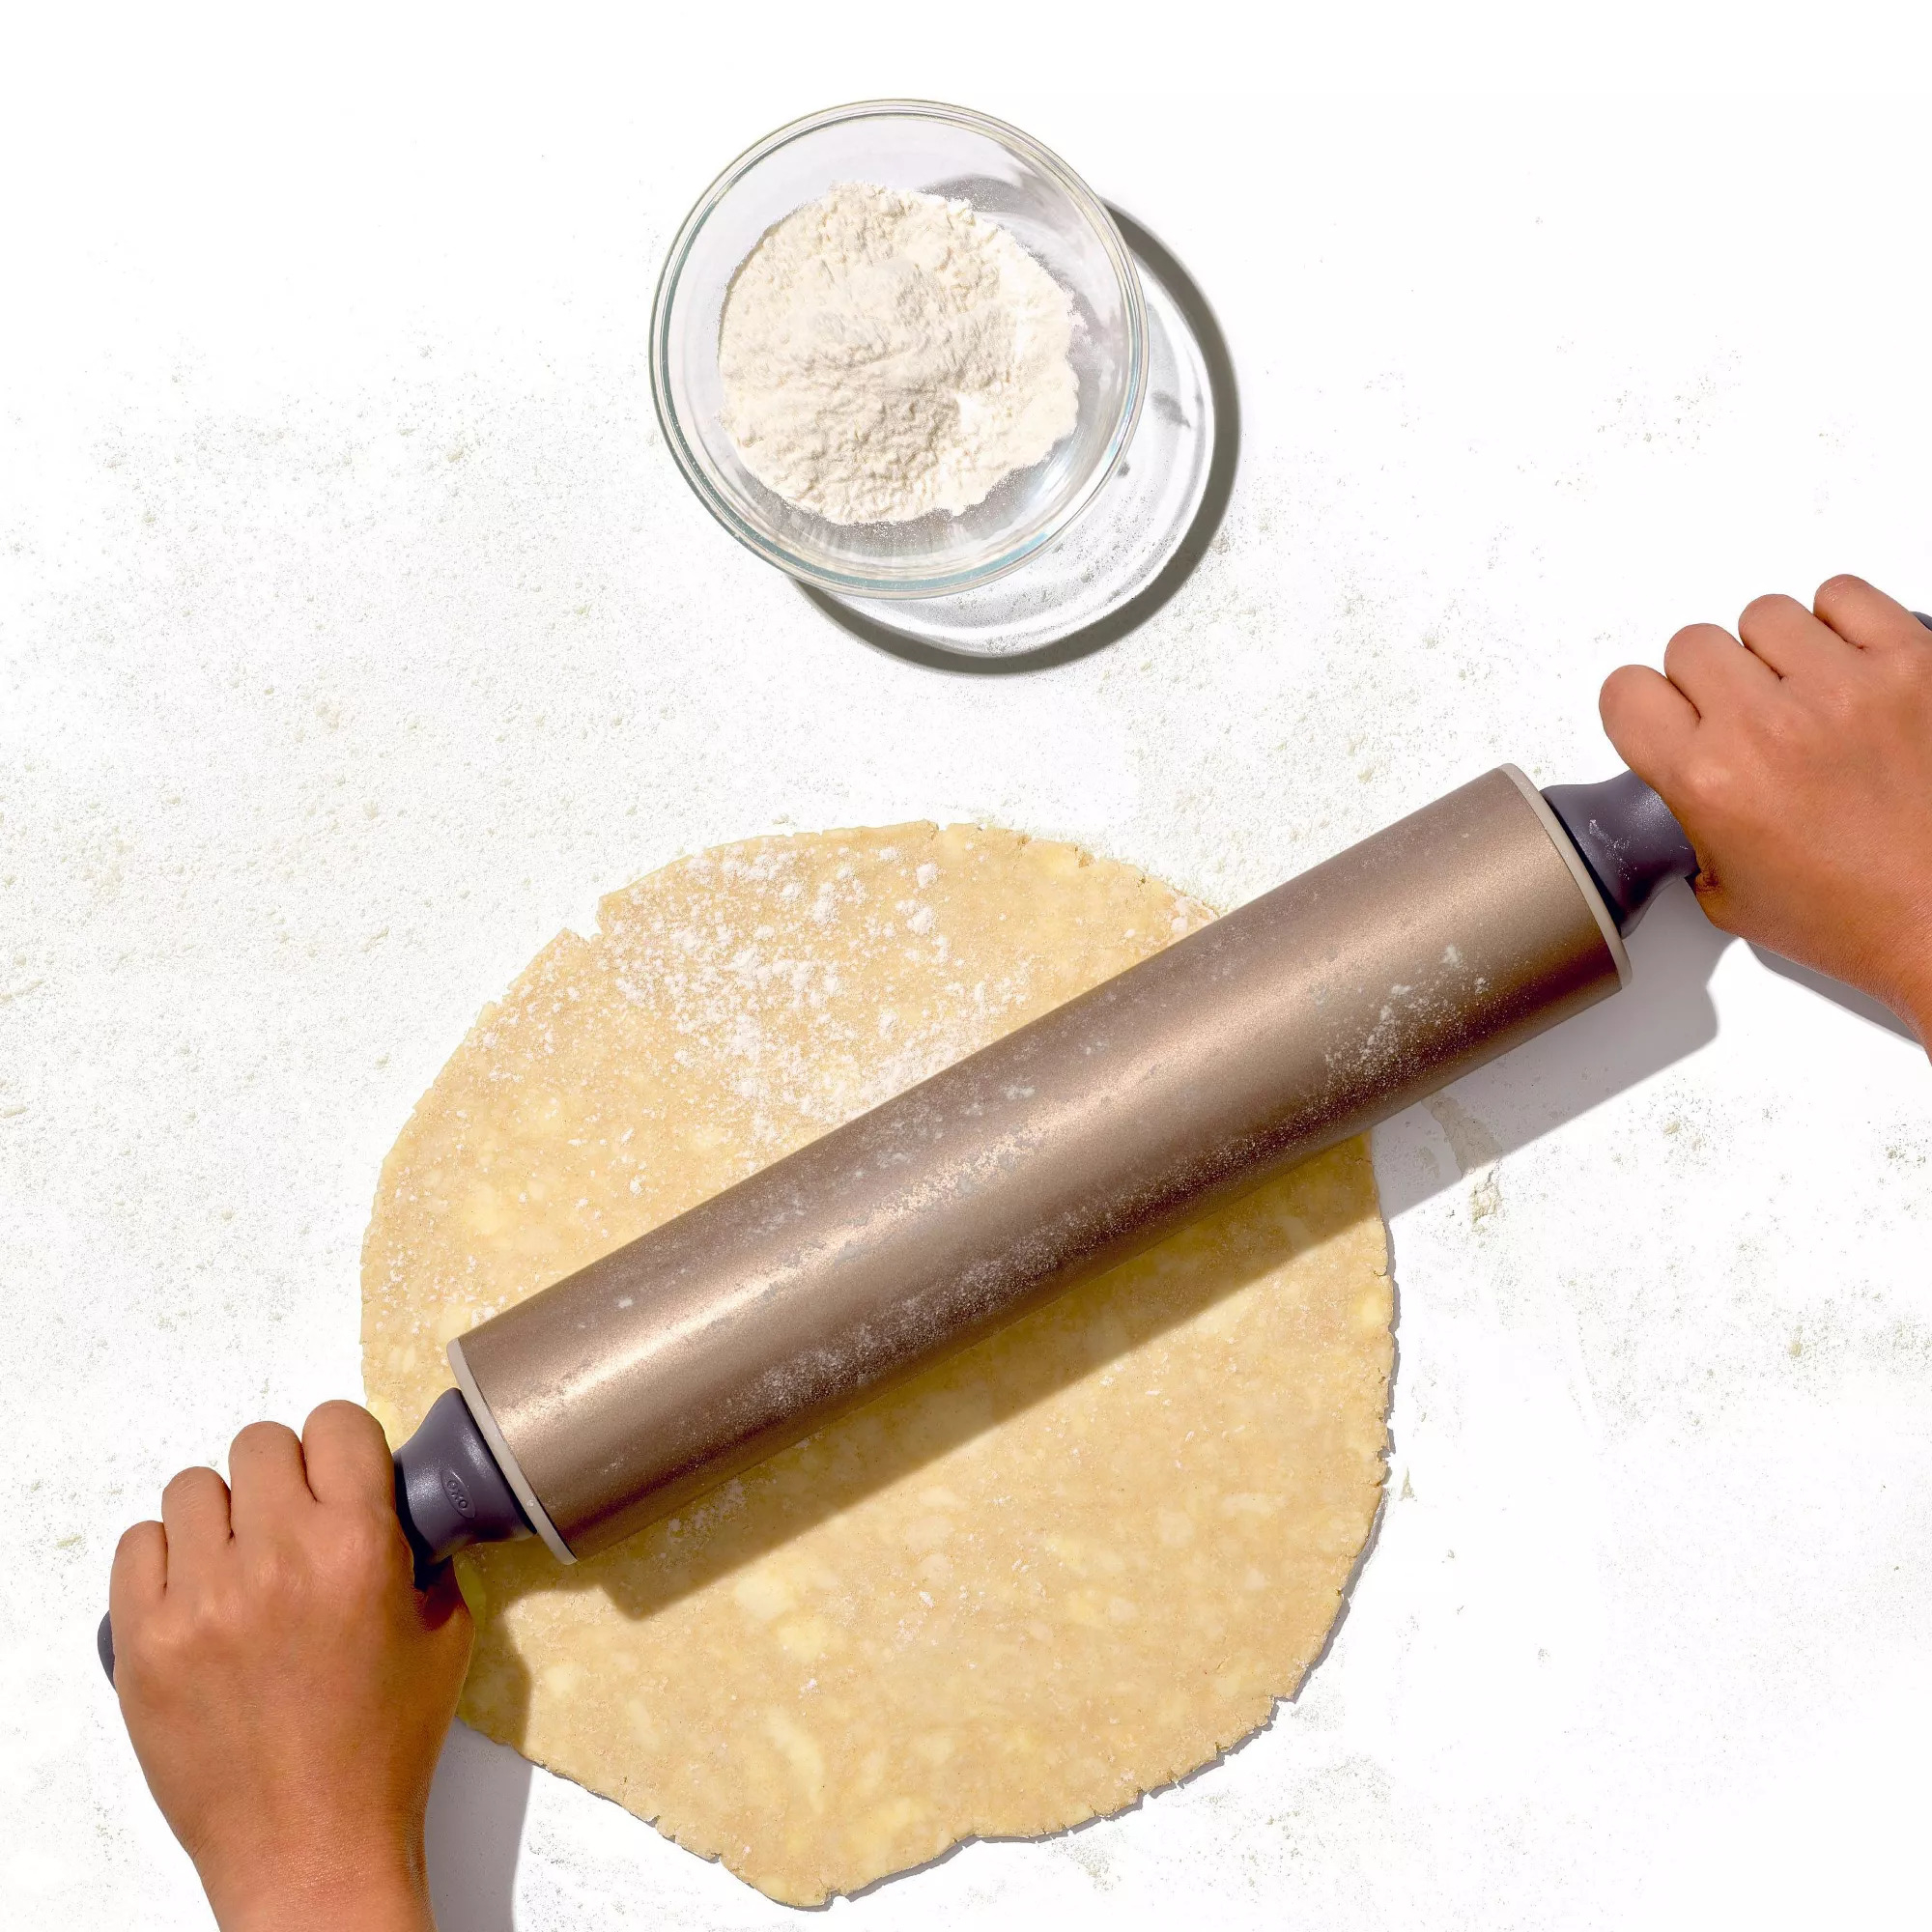 A model using the rolling pin